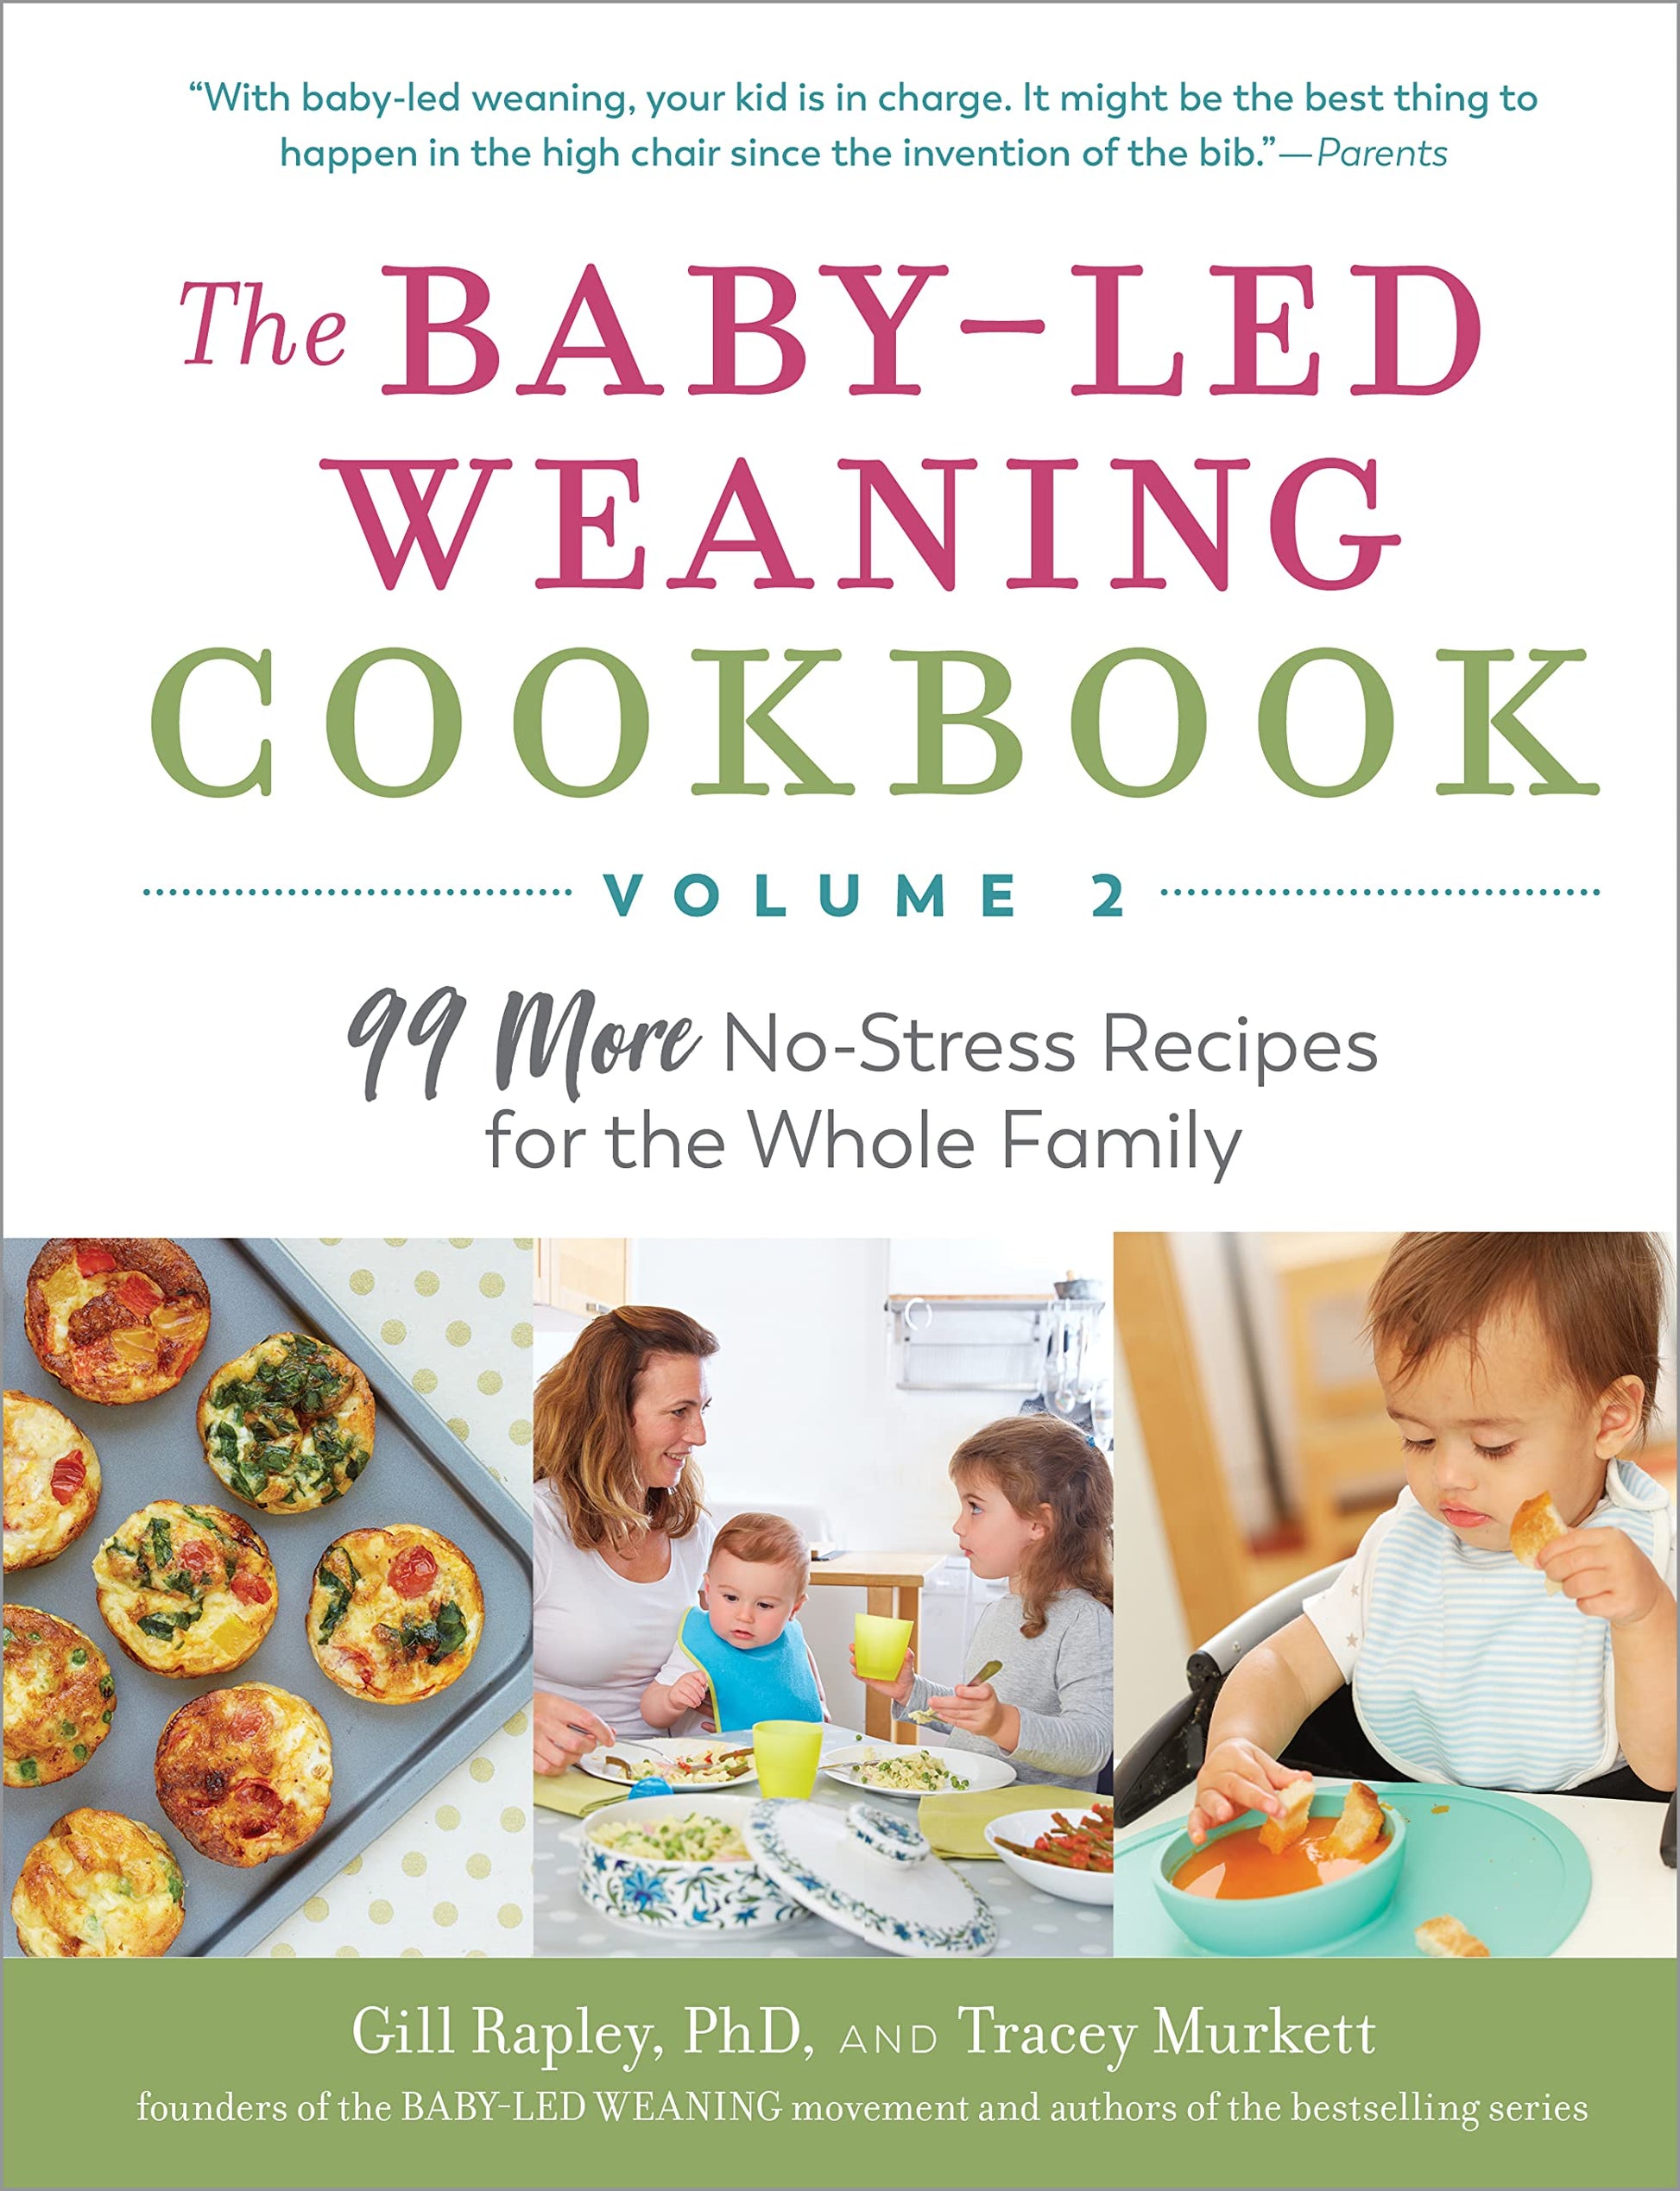 The Baby-Led Weaning Cookbook—Volume 2: 99 More No-Stress Recipes for the Whole Family (The Authoritative Baby-Led Weaning Series)